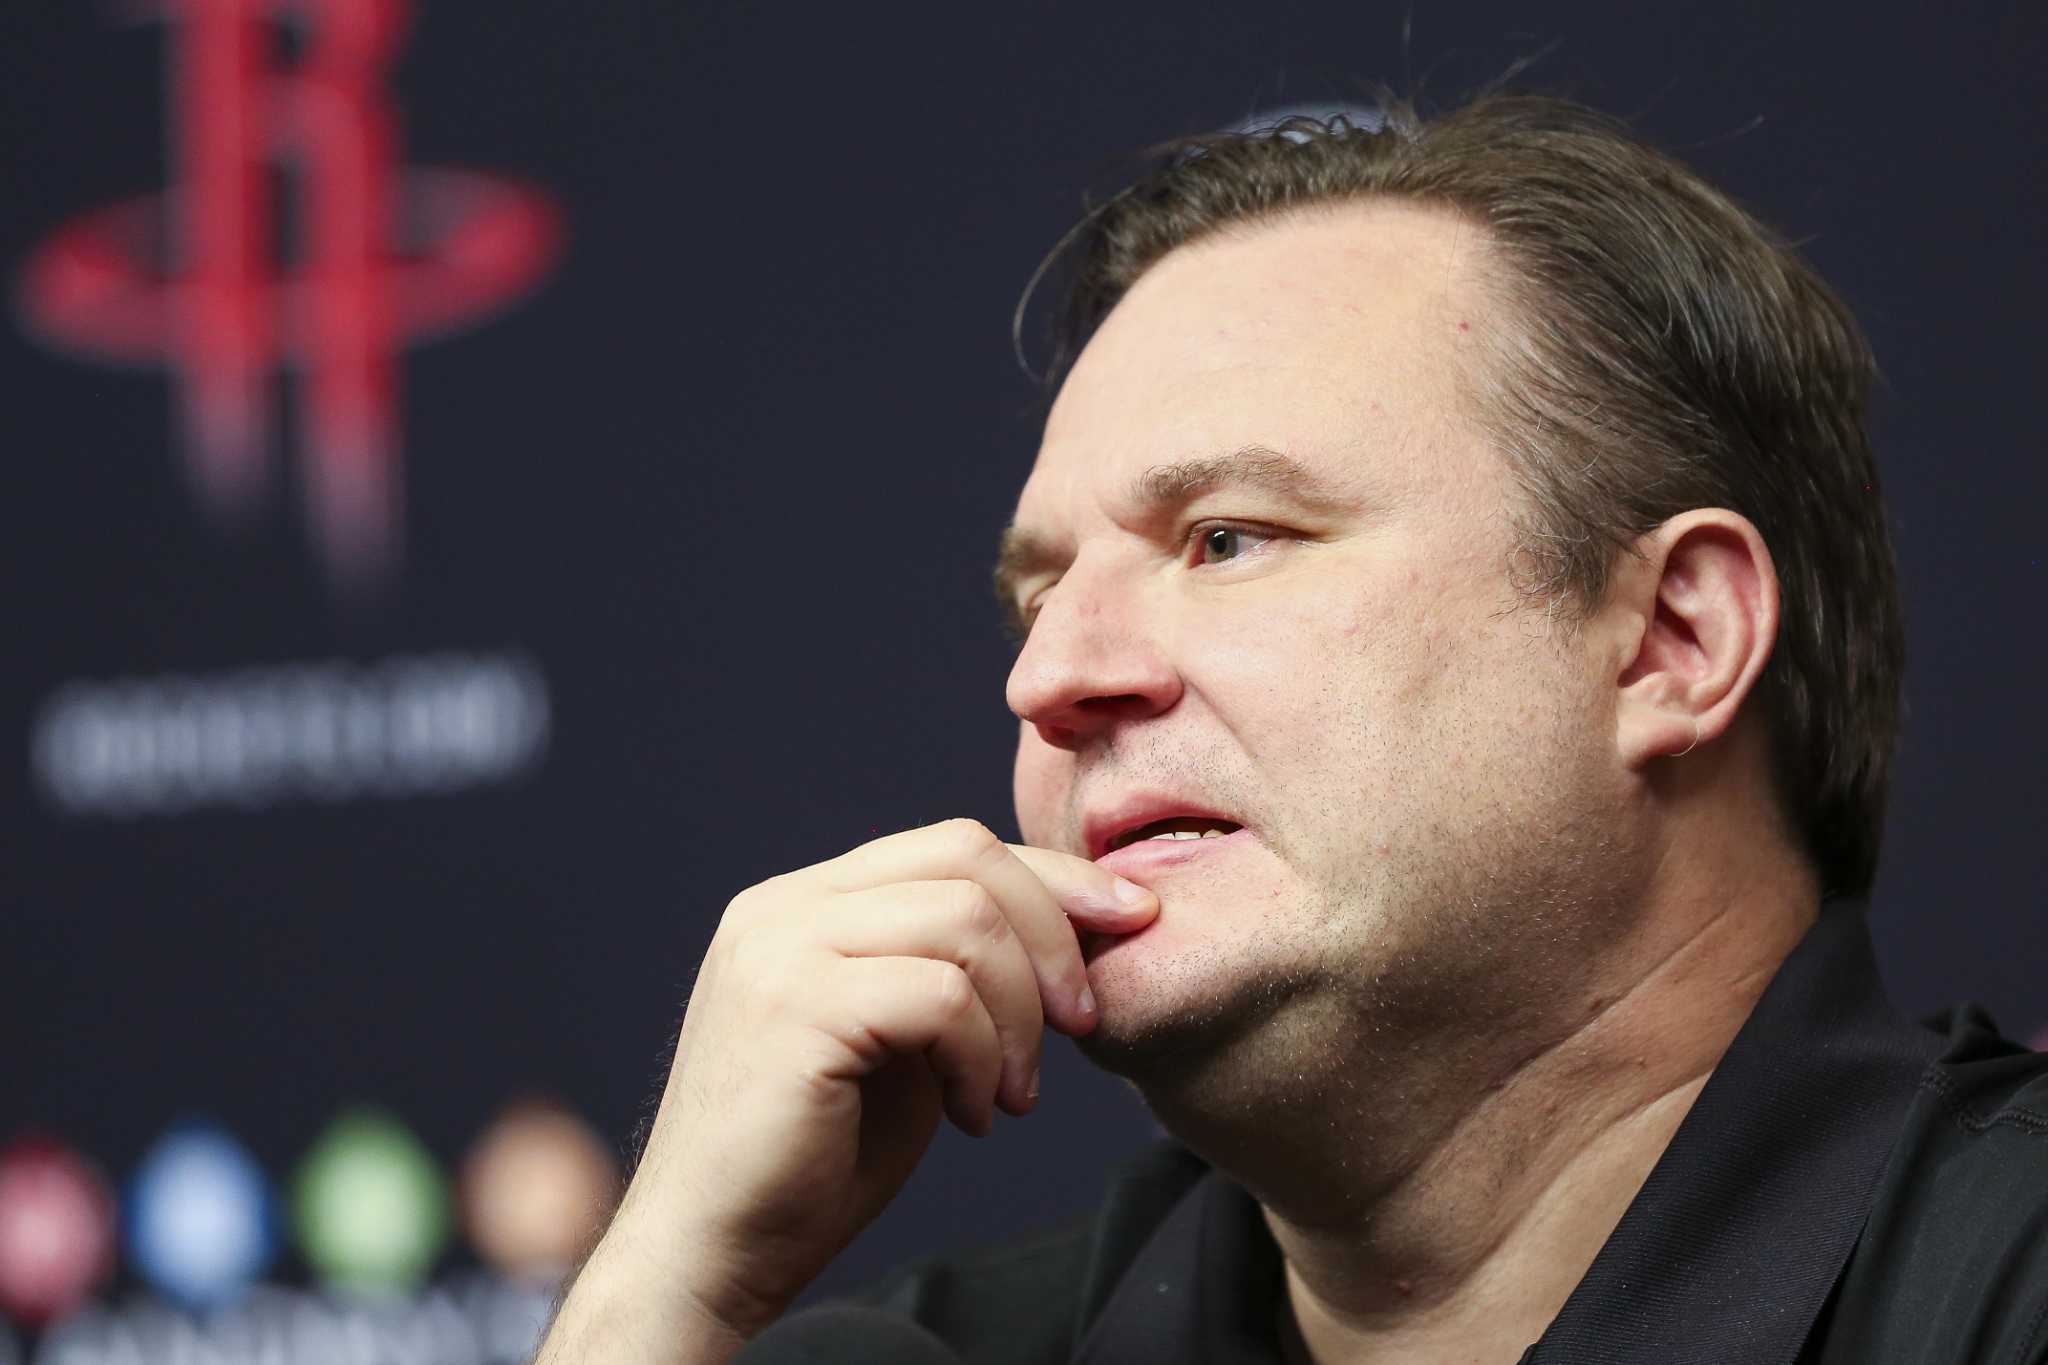 Houston Rockets General Manager Daryl Morey faces a tough road ahead